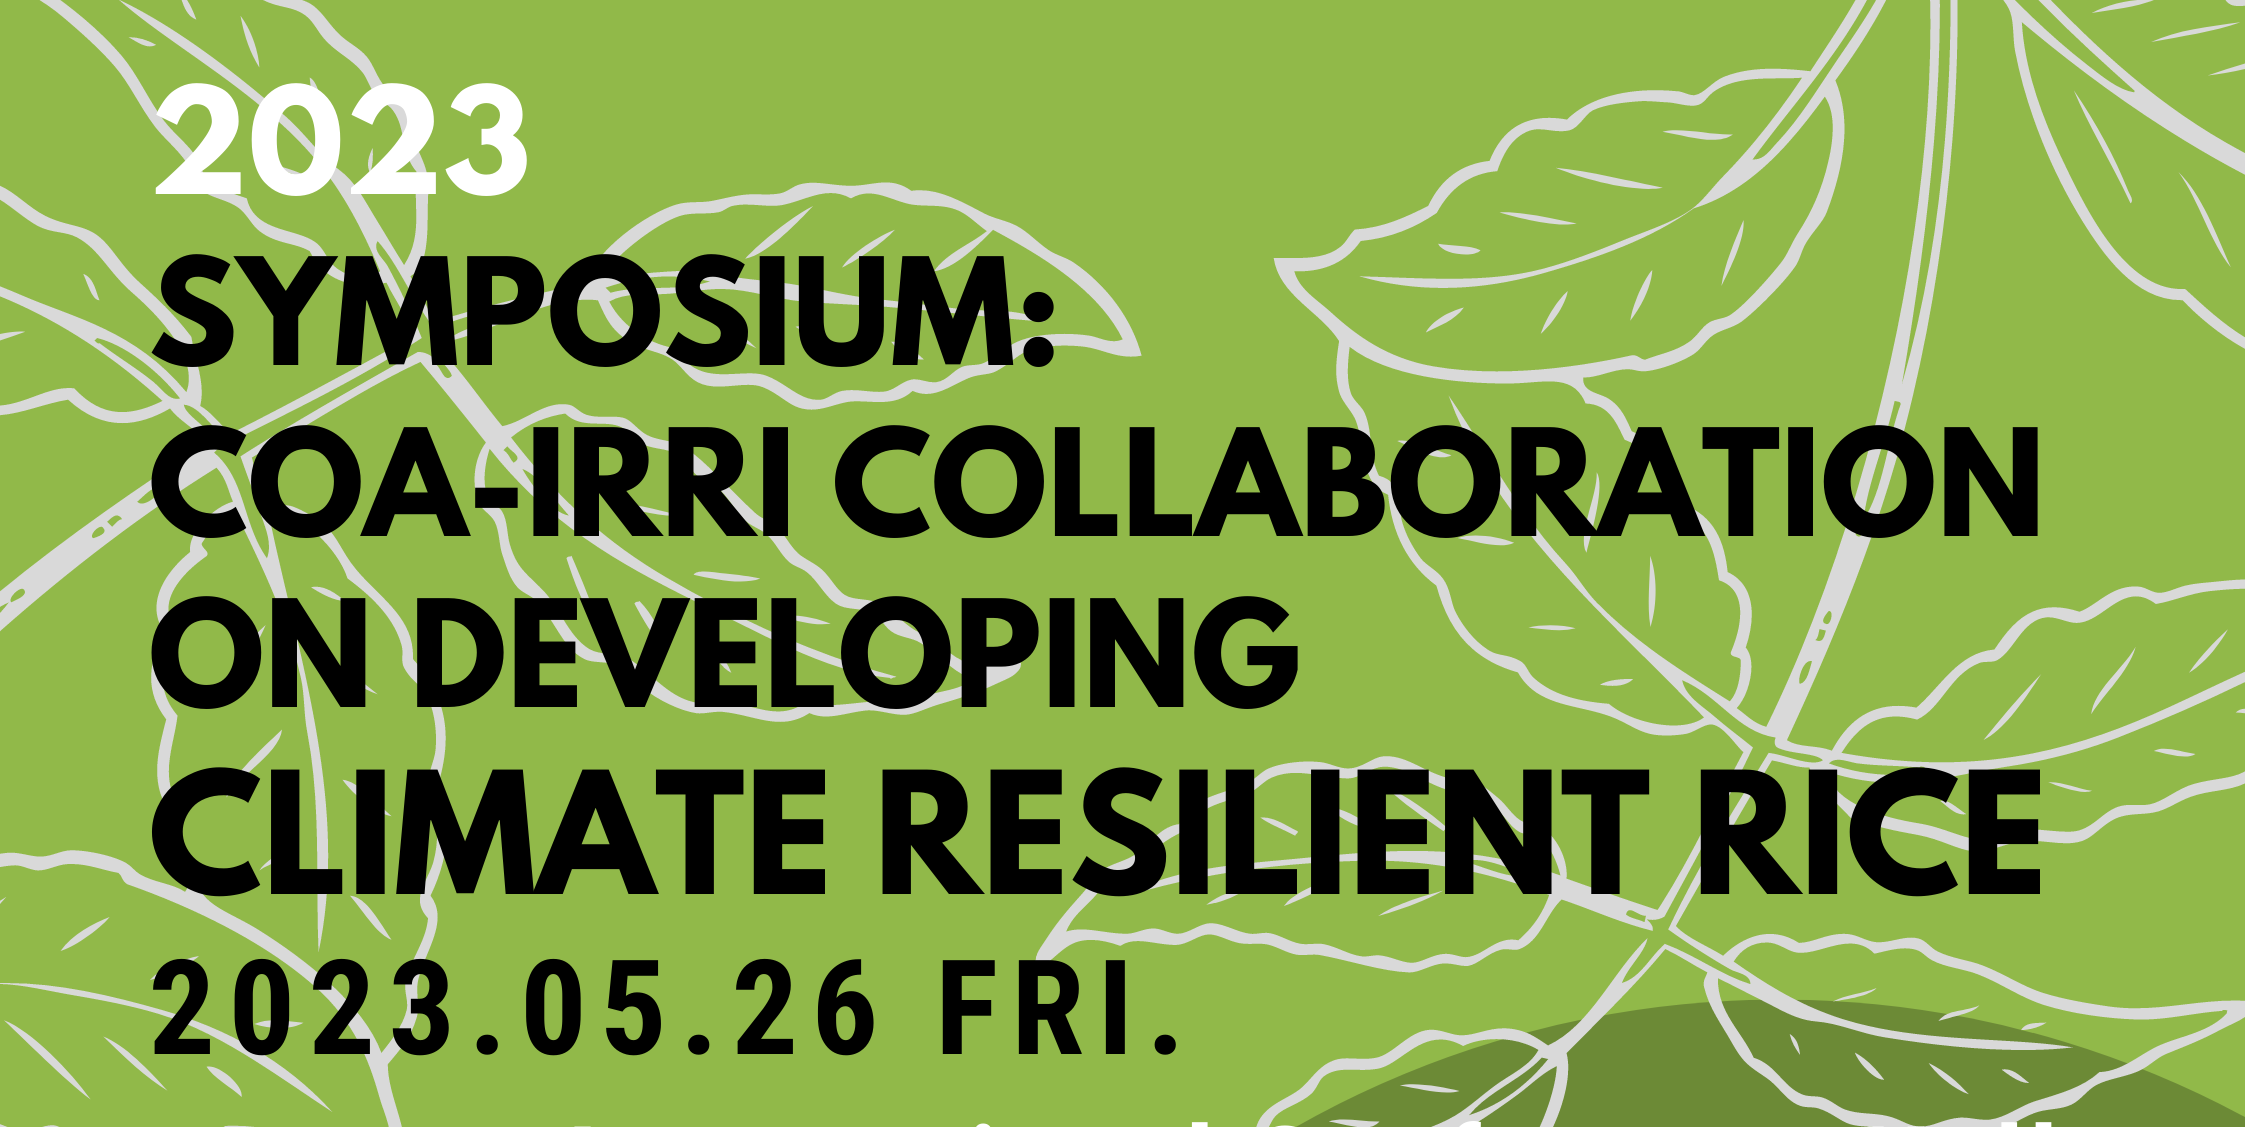 2023 Symposium: COA-IRRI Collaboration on Developing Climate Resilient Rice_121